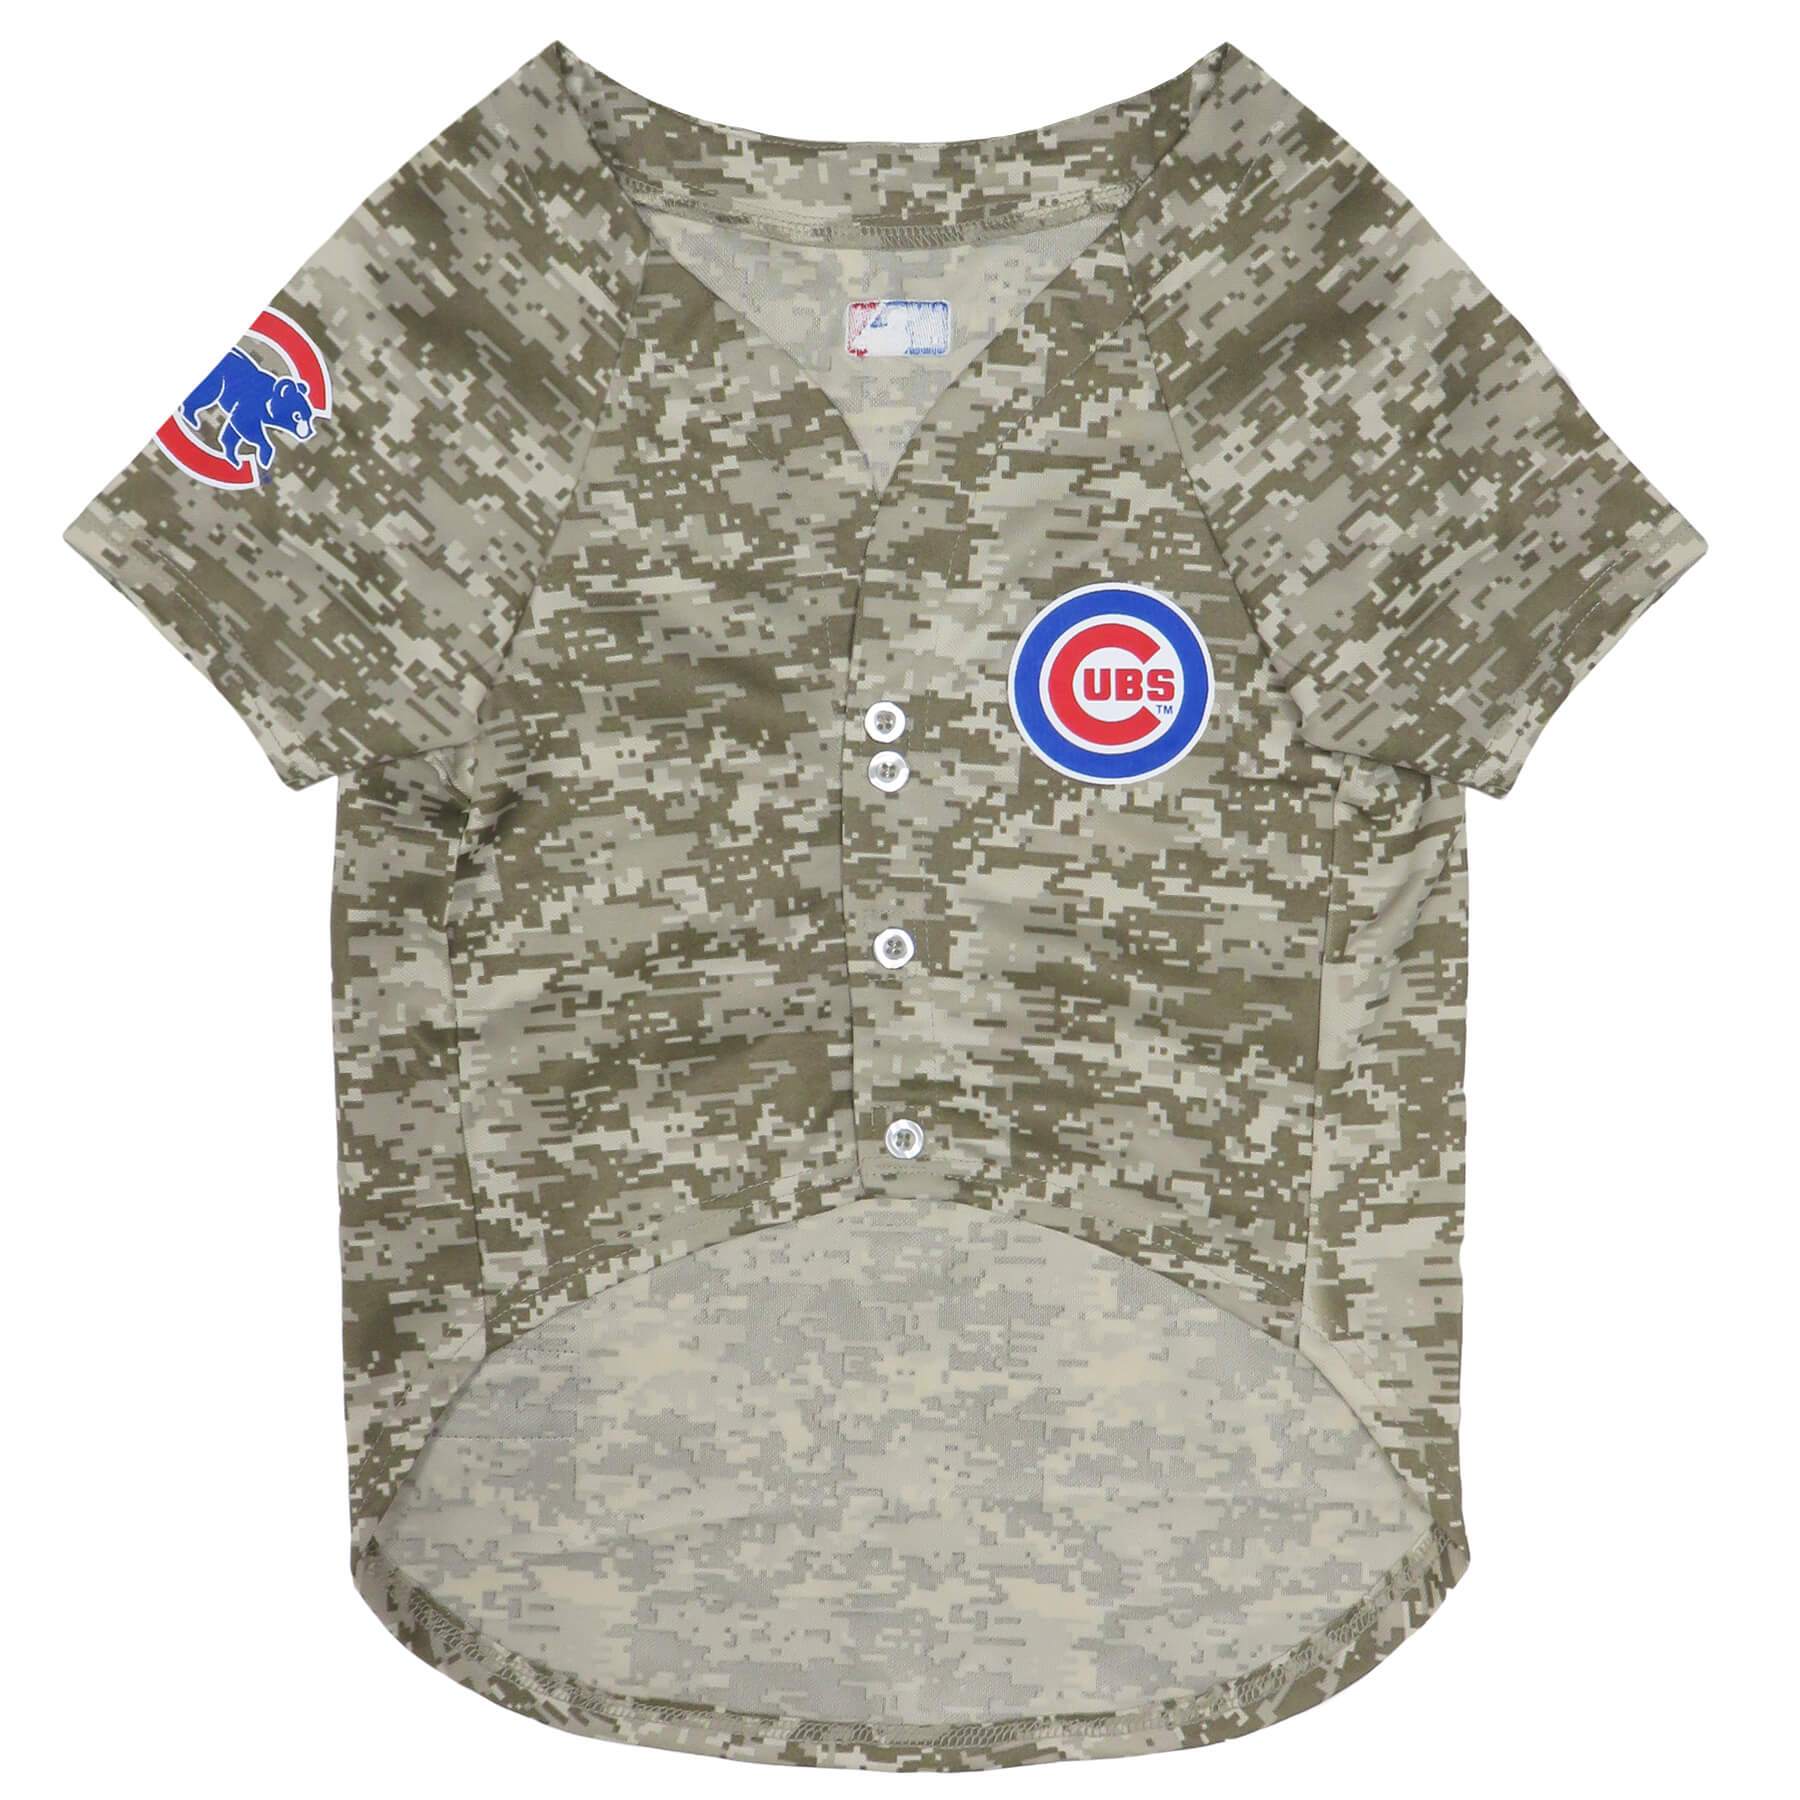 champs cubs jersey